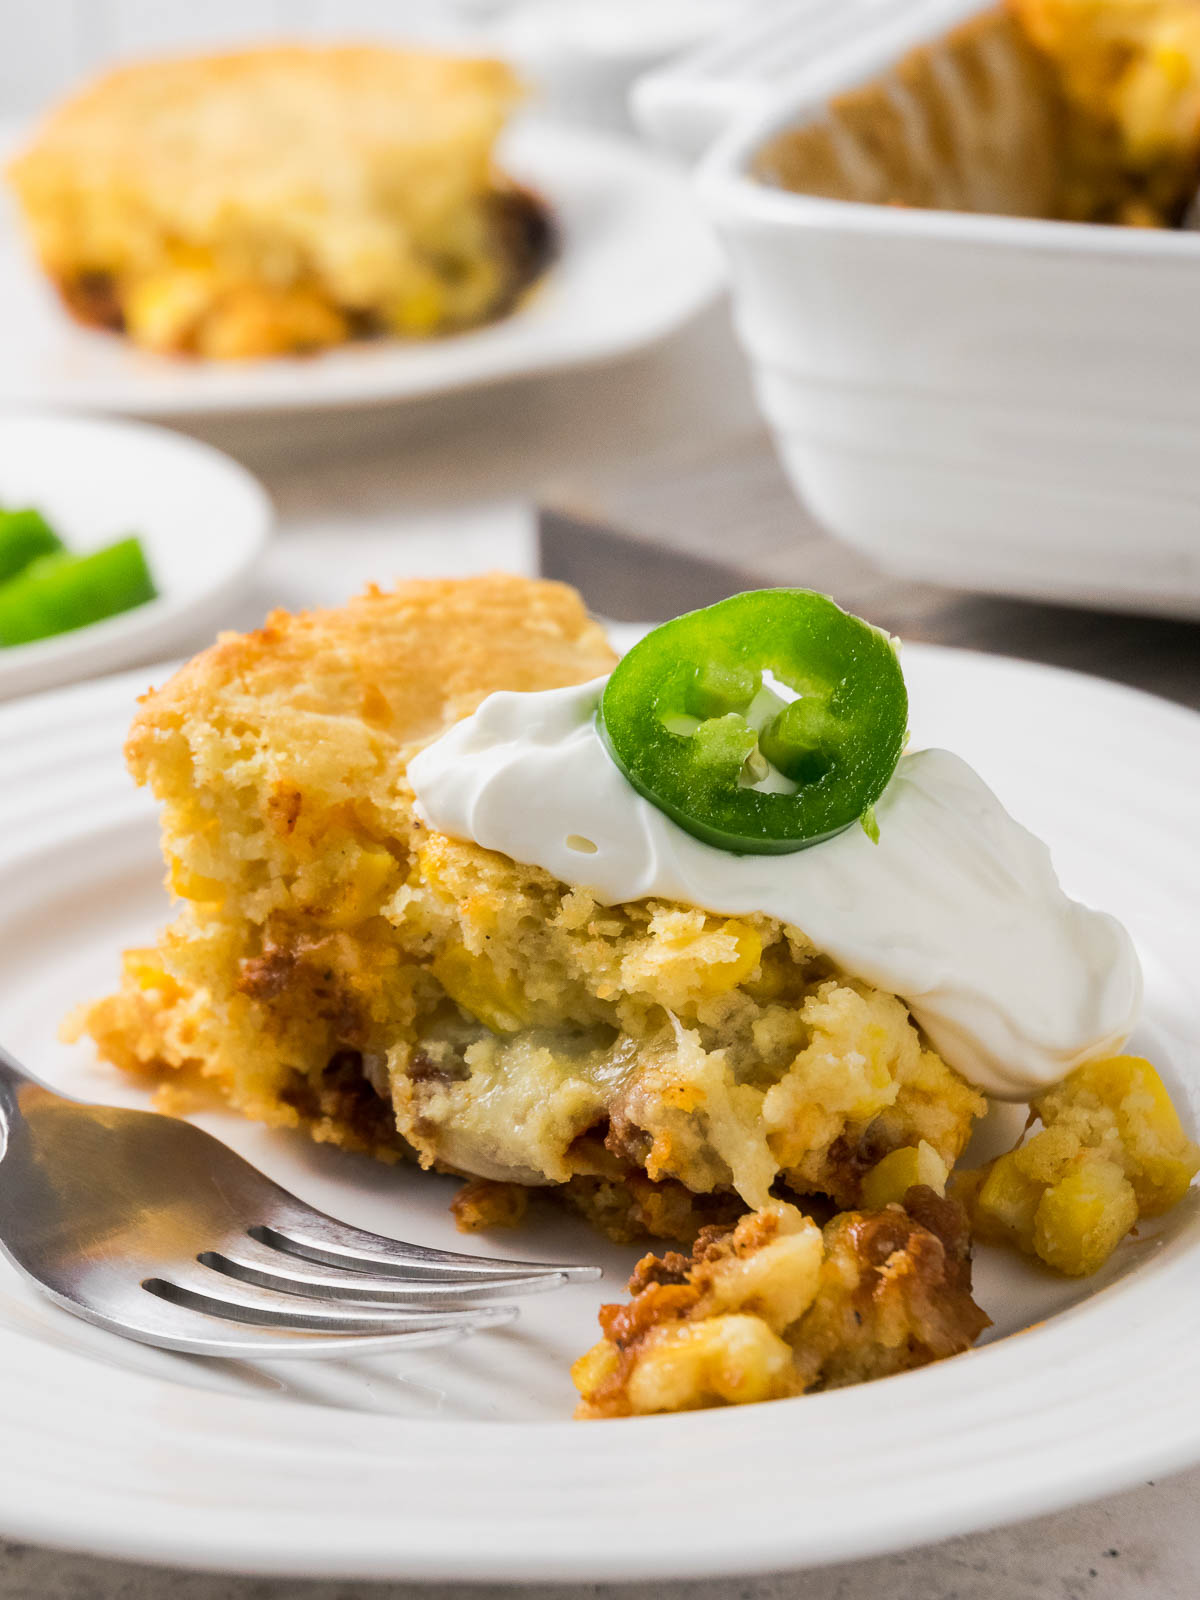 A slice of Mexican cornbread casserole with ground beef topped with sour cream on a plate with a fork.